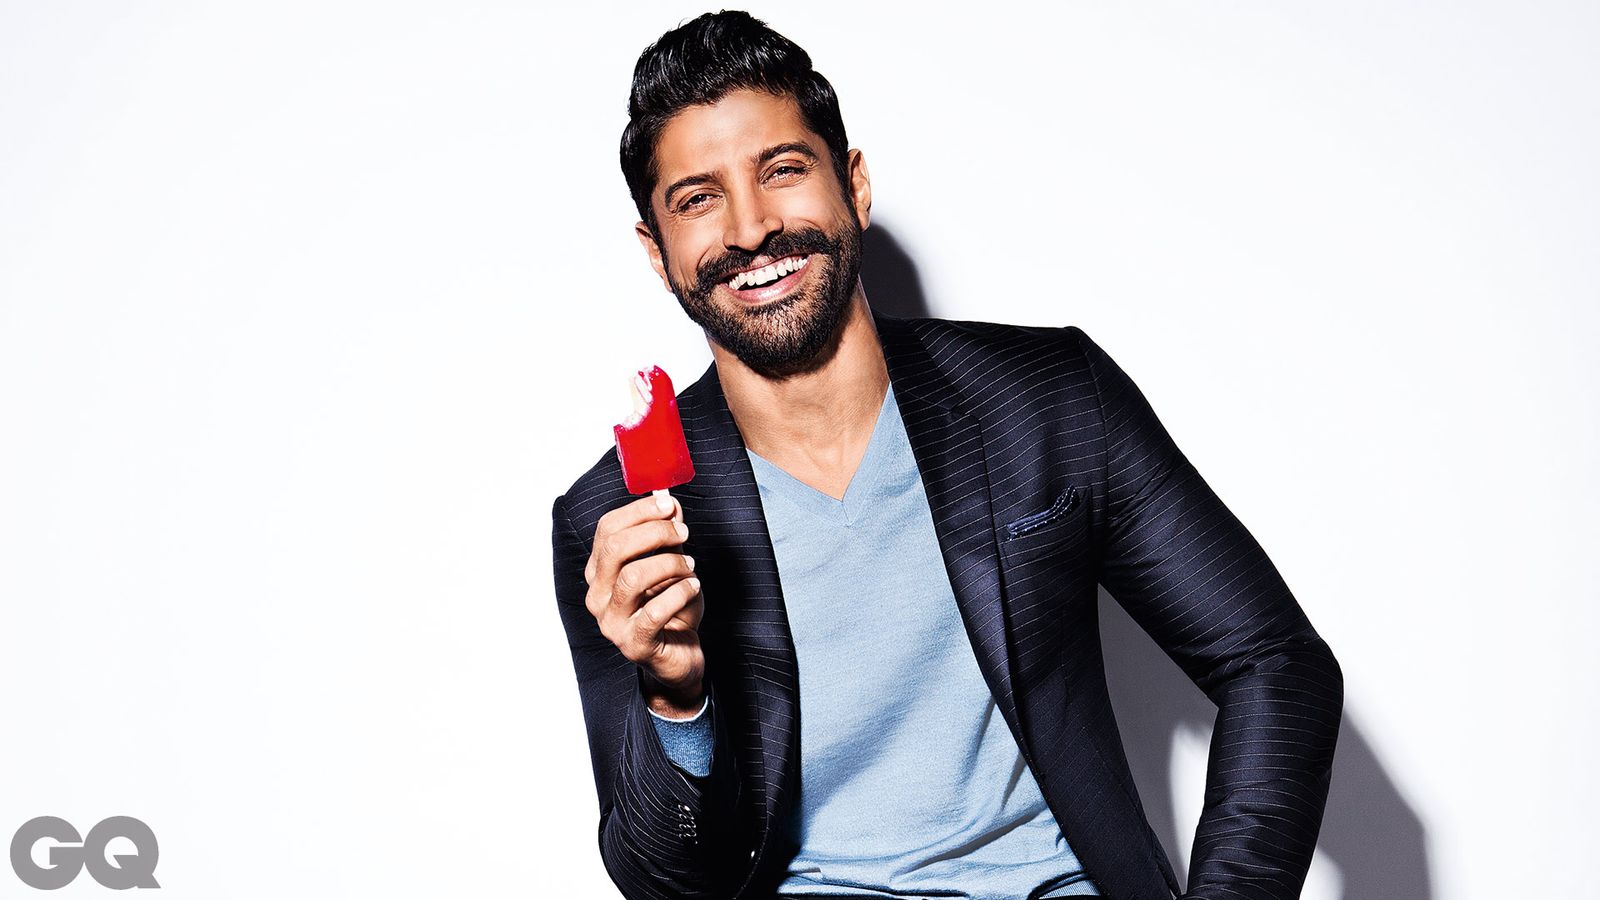 Farhan Akhtar Will Release A Song For Women’s Day, Dedicated To His Daughter